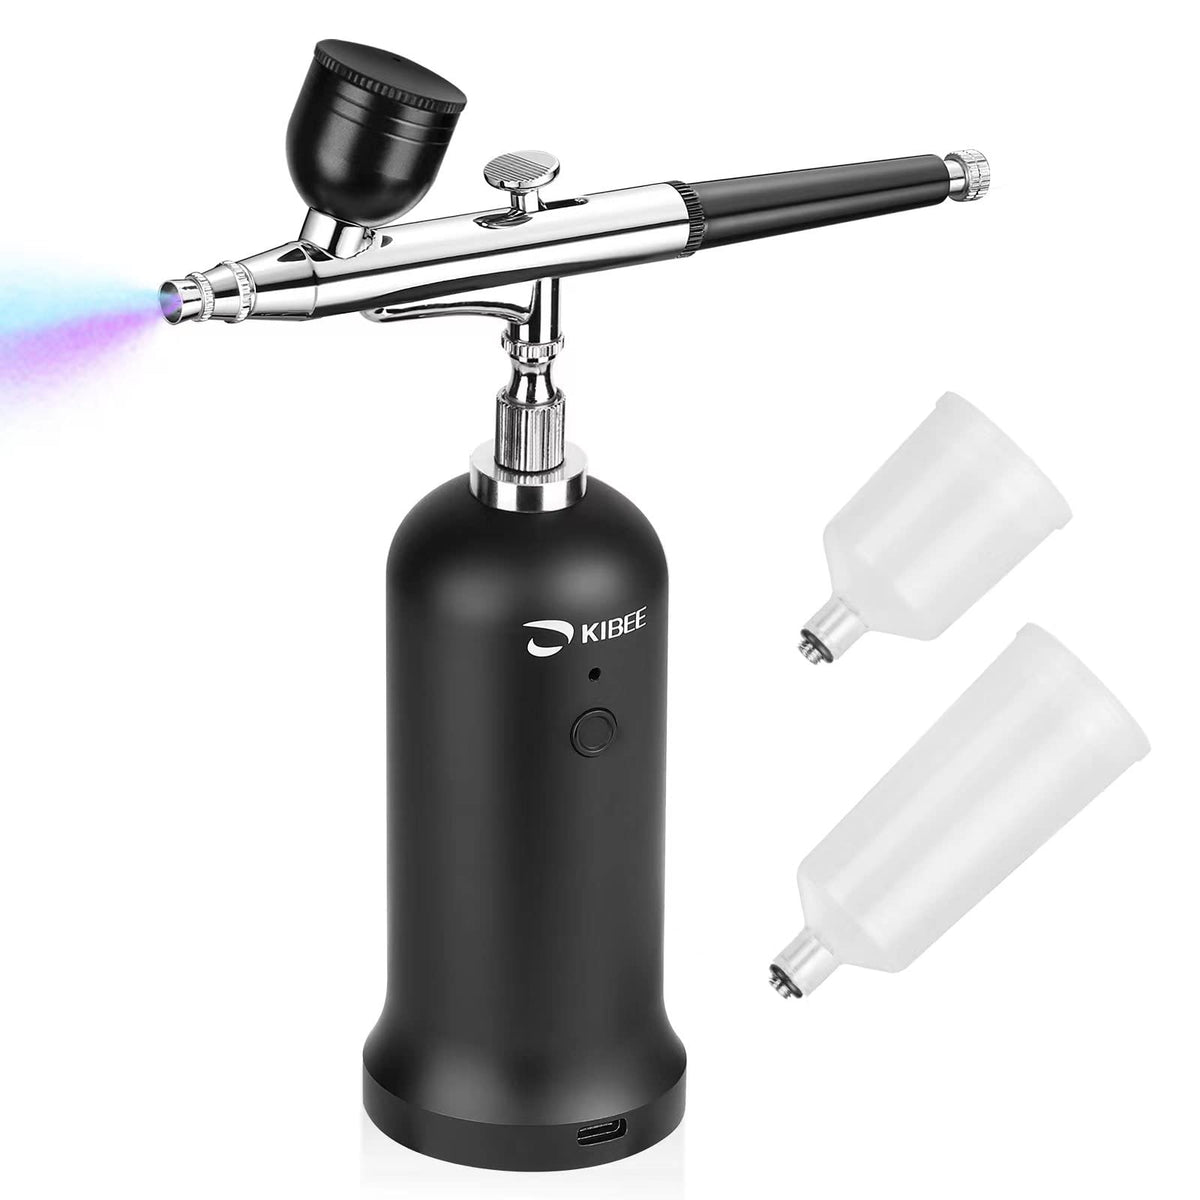 Upgrade Airbrush Kit with Air Compressor Mini Handheld Airbrush Sets,  Portable Dual-Action Airbrush Air Brush for Cake Decoration, Makeup, T-Shirt